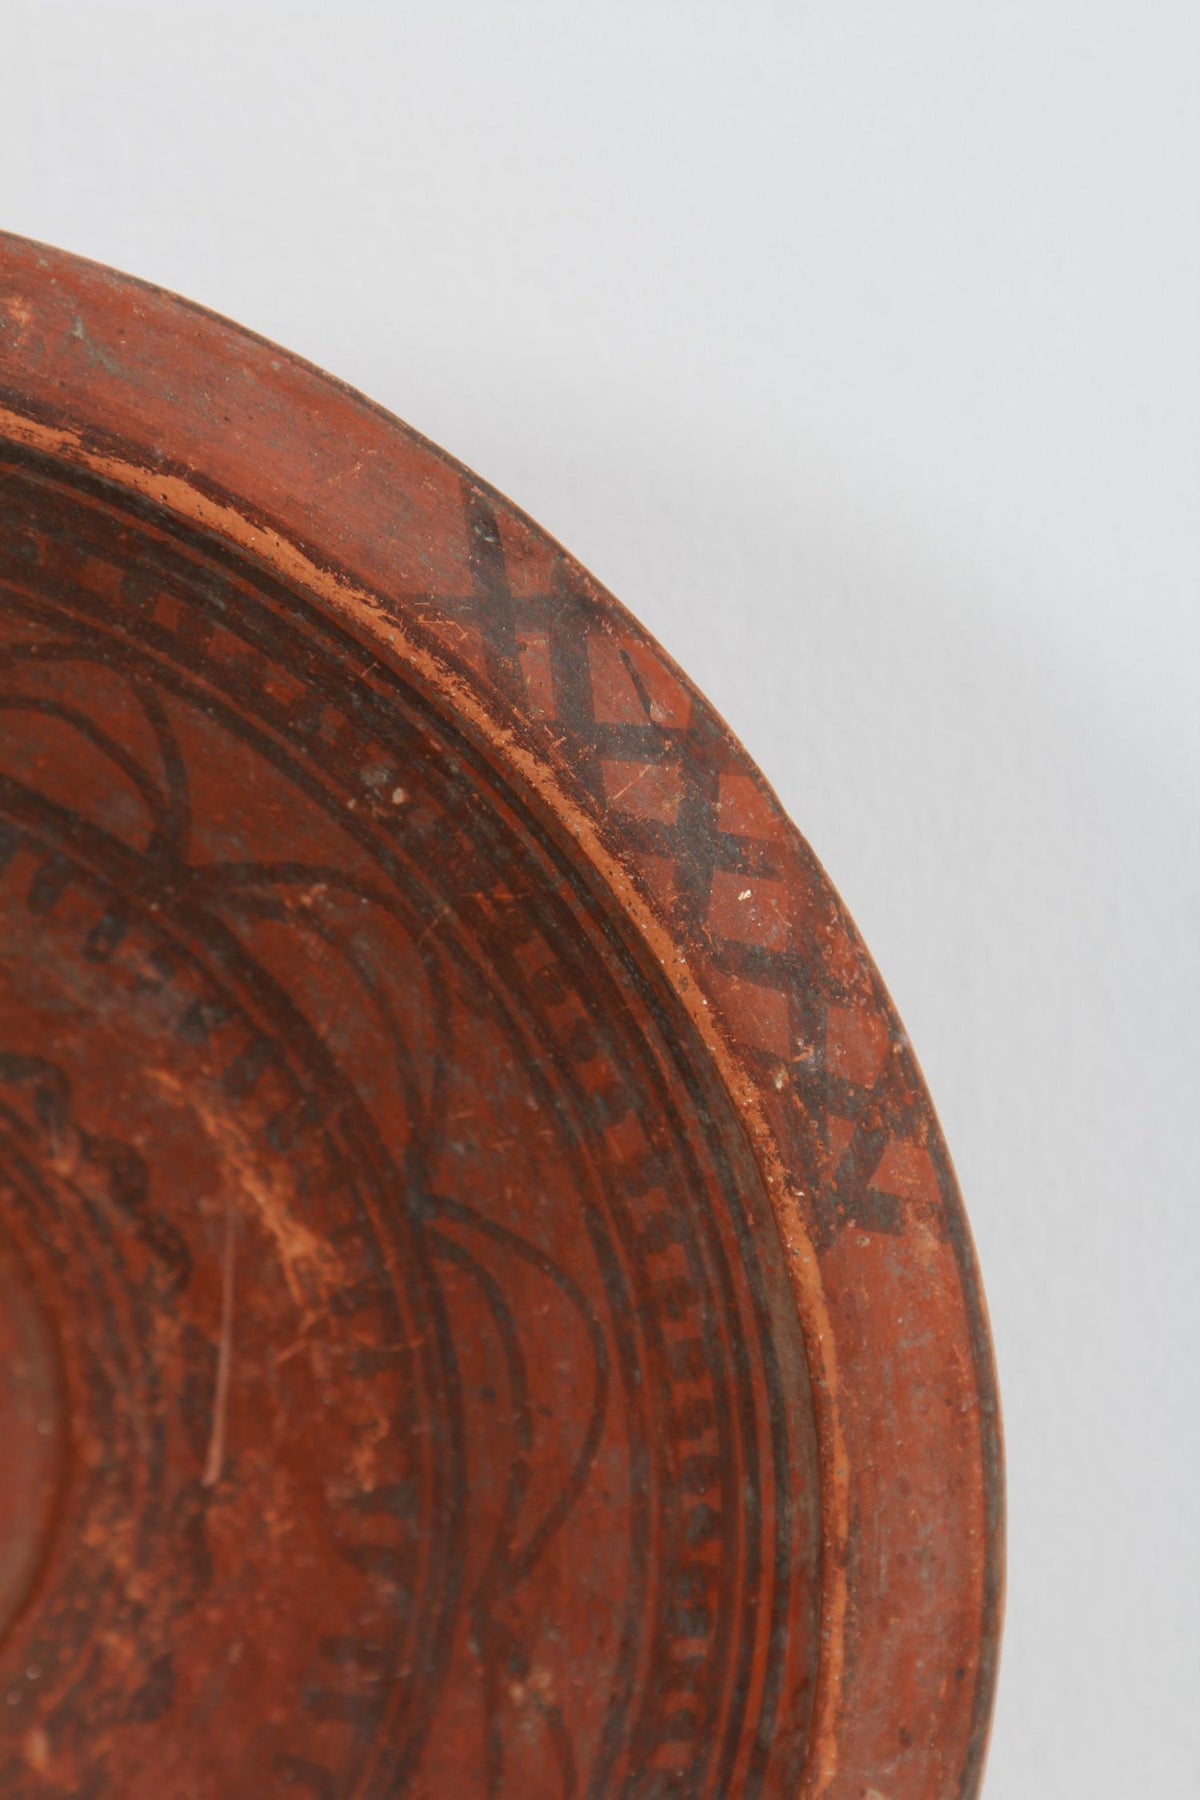 NORTH AFRICAN HAND PAINTED TERRACOTTA TRIBAL BOWL